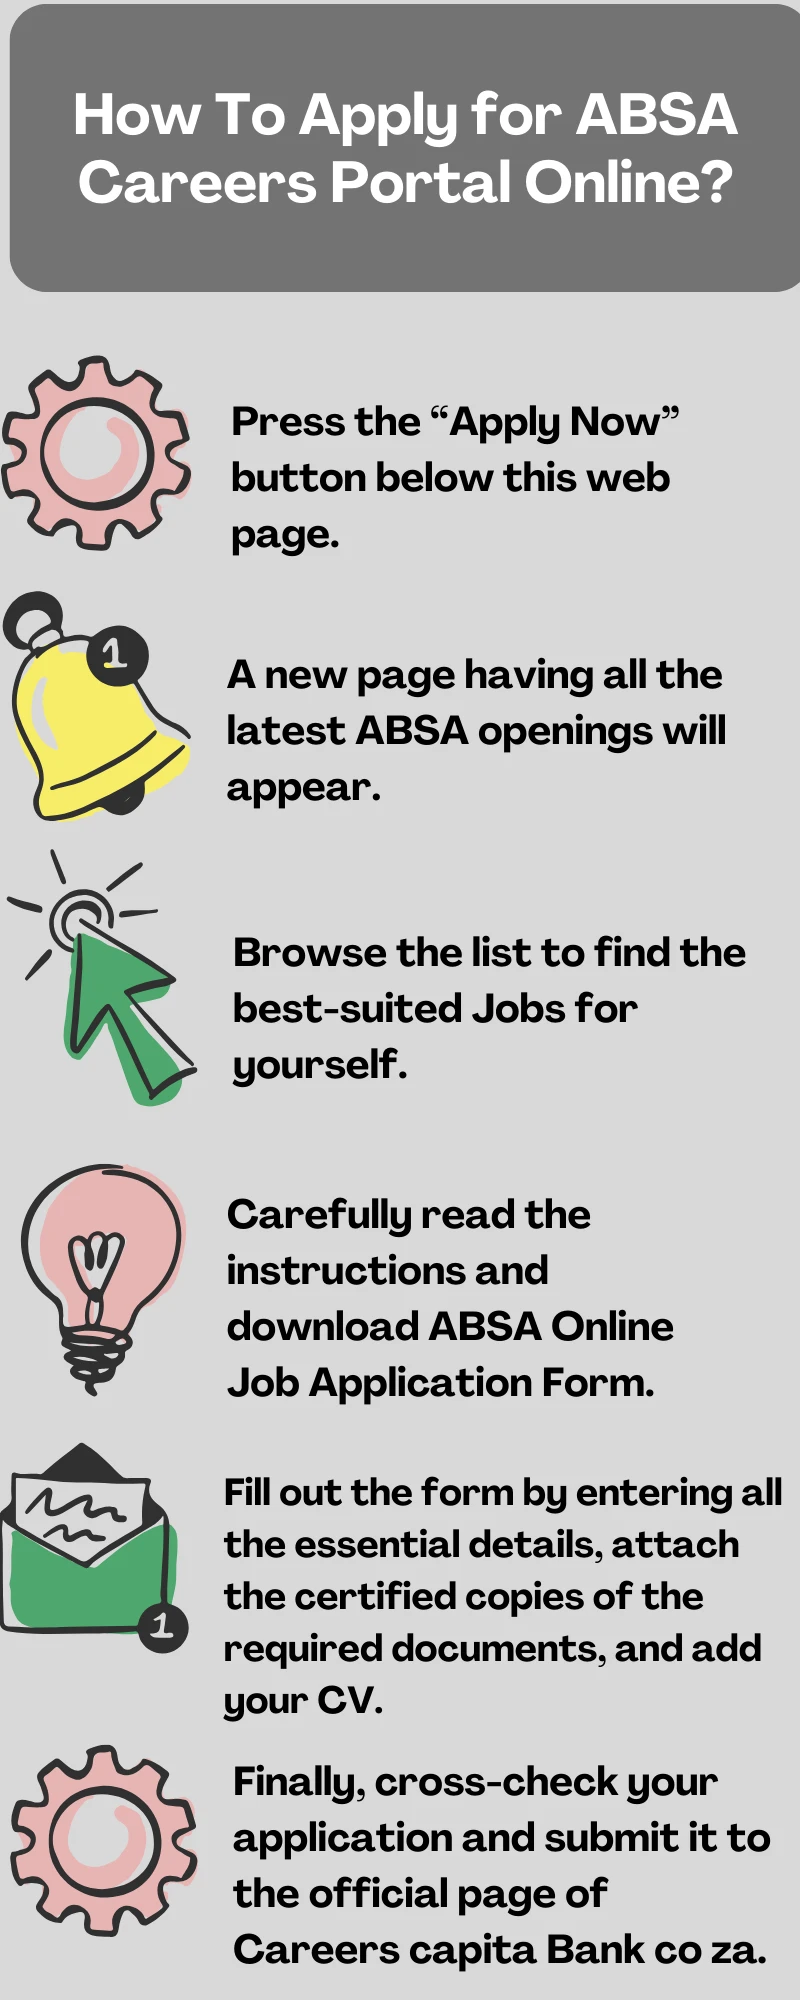 How To Apply for ABSA Careers Portal Online?